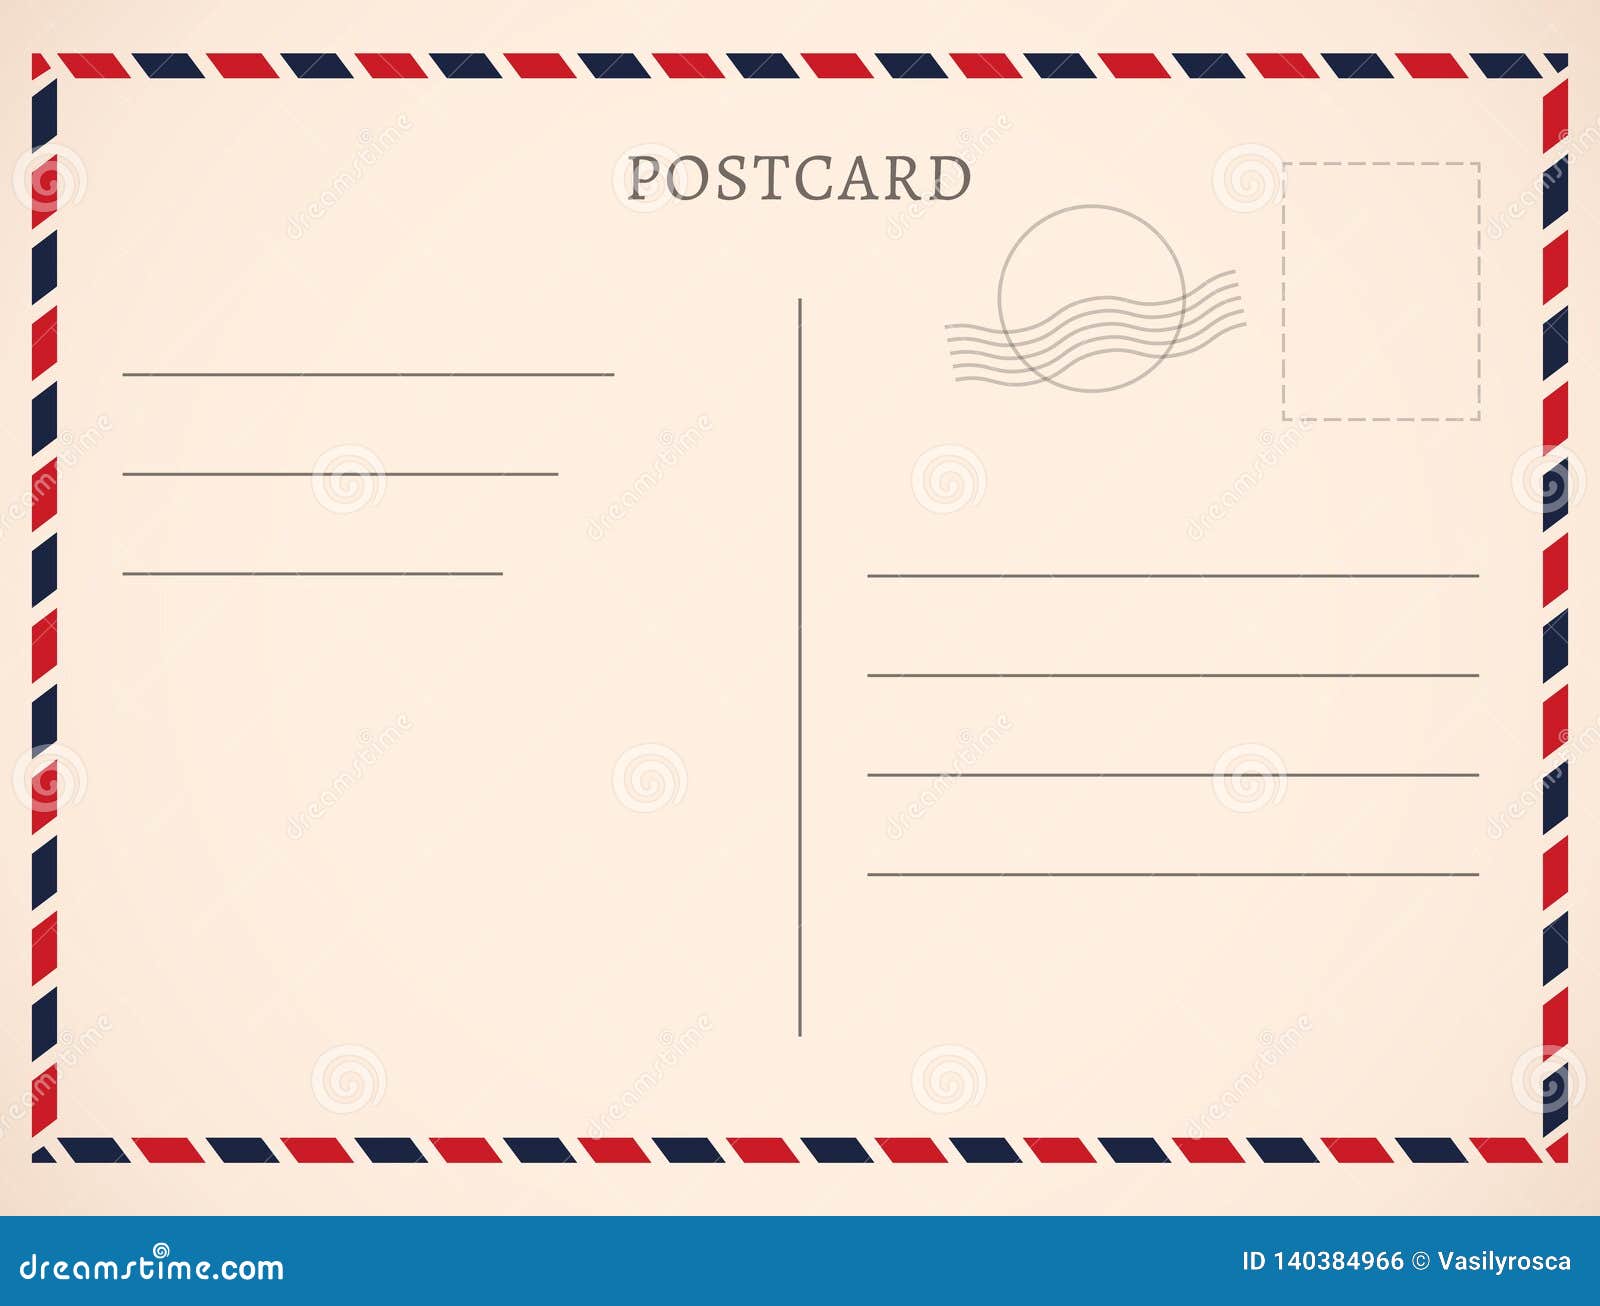 Postcard Template Paper White Texture. Vector Postcard Empty Mail In Postcard Mailer Template